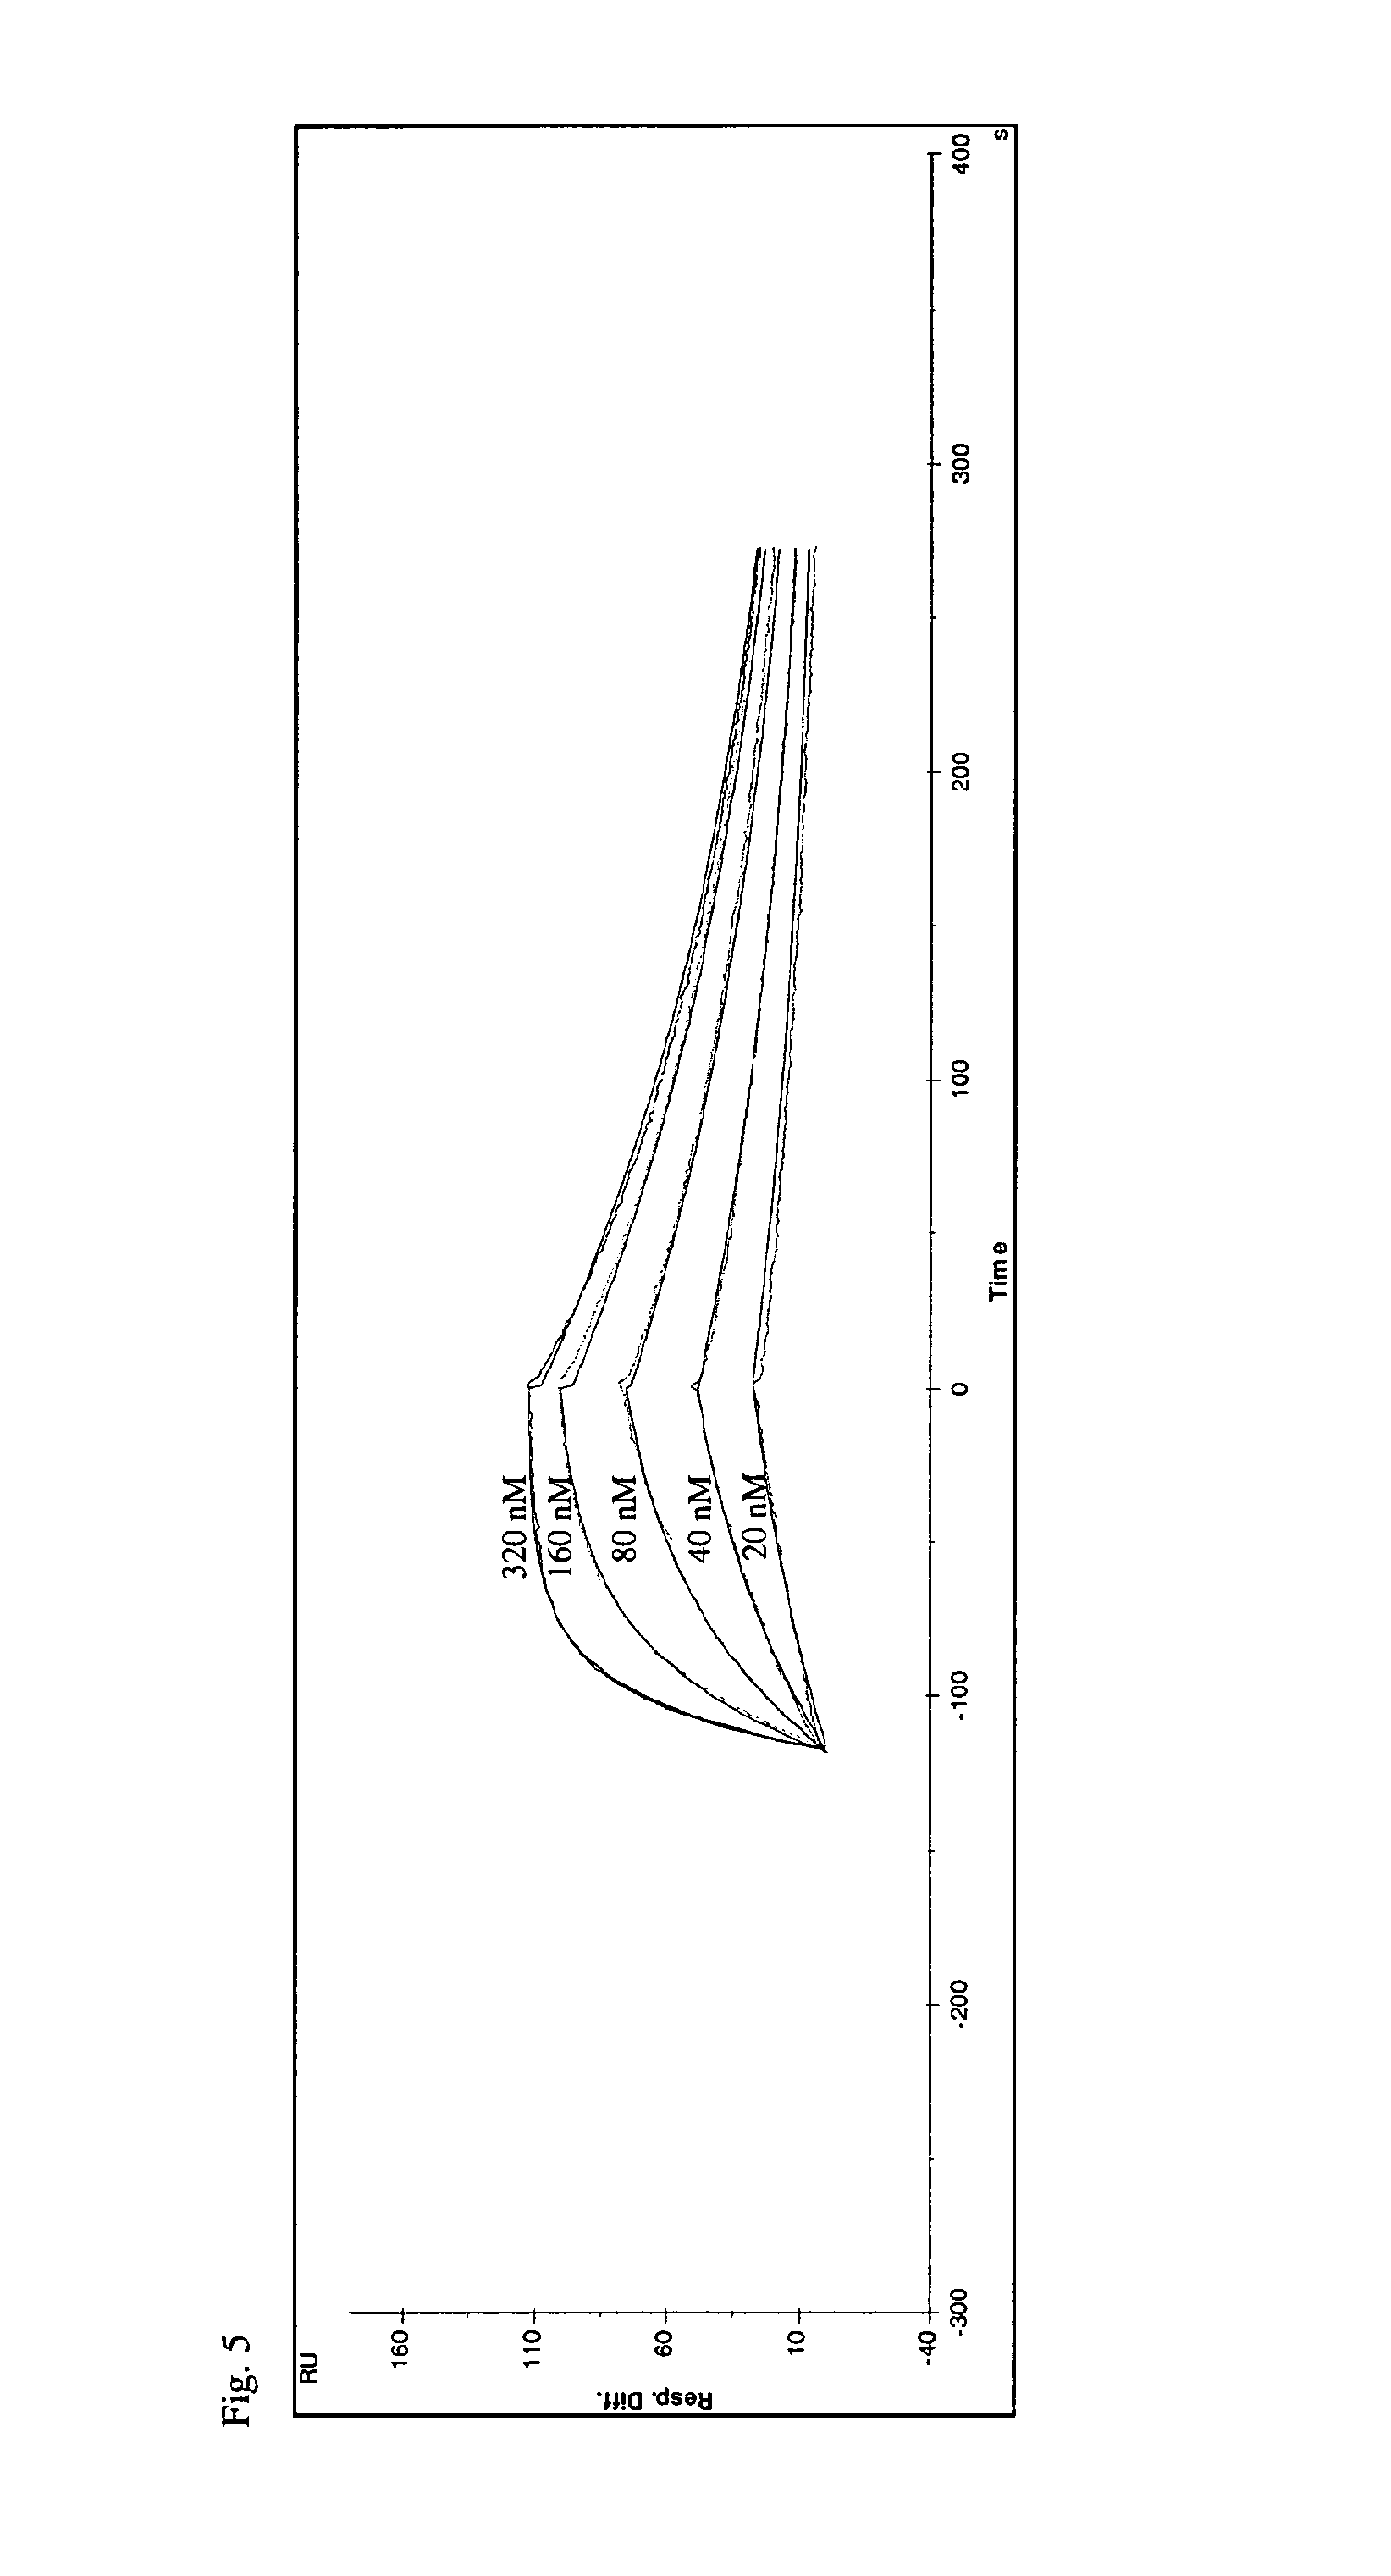 Muteins of tear lipocalin and methods for obtaining the same